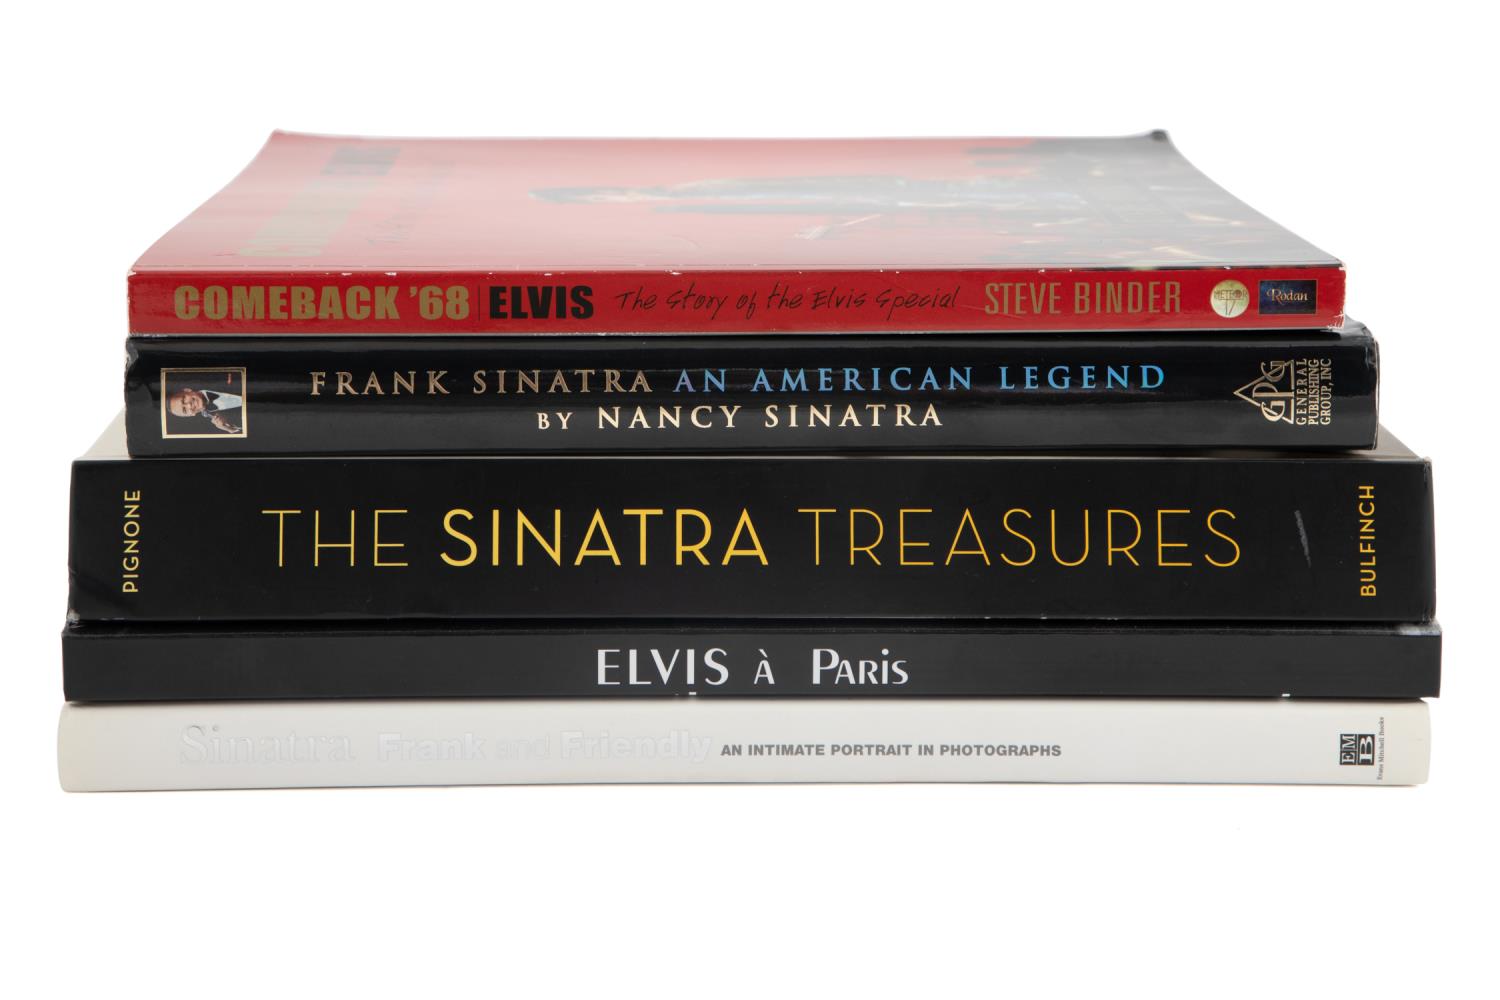 FIVE BOOKS ON ELVIS PRESLEY AND 2bff13